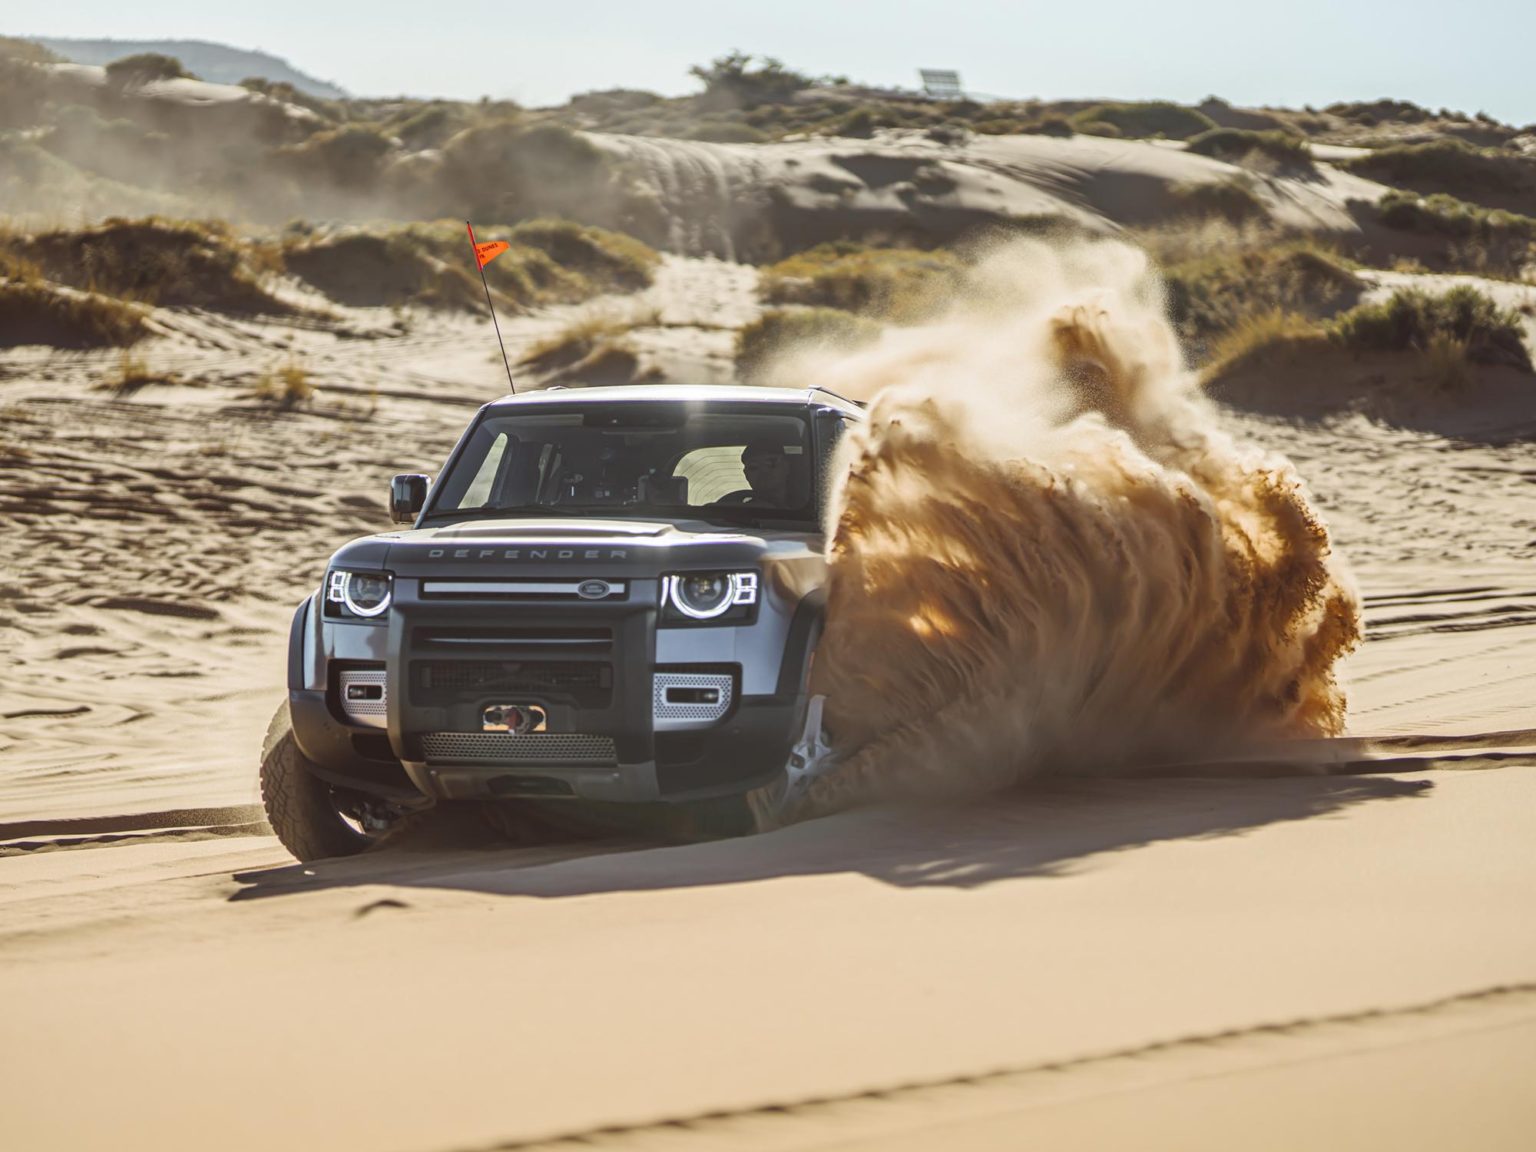 The Land Rover Defender is showcased in a new documentary that features a five-day overloading expedition.